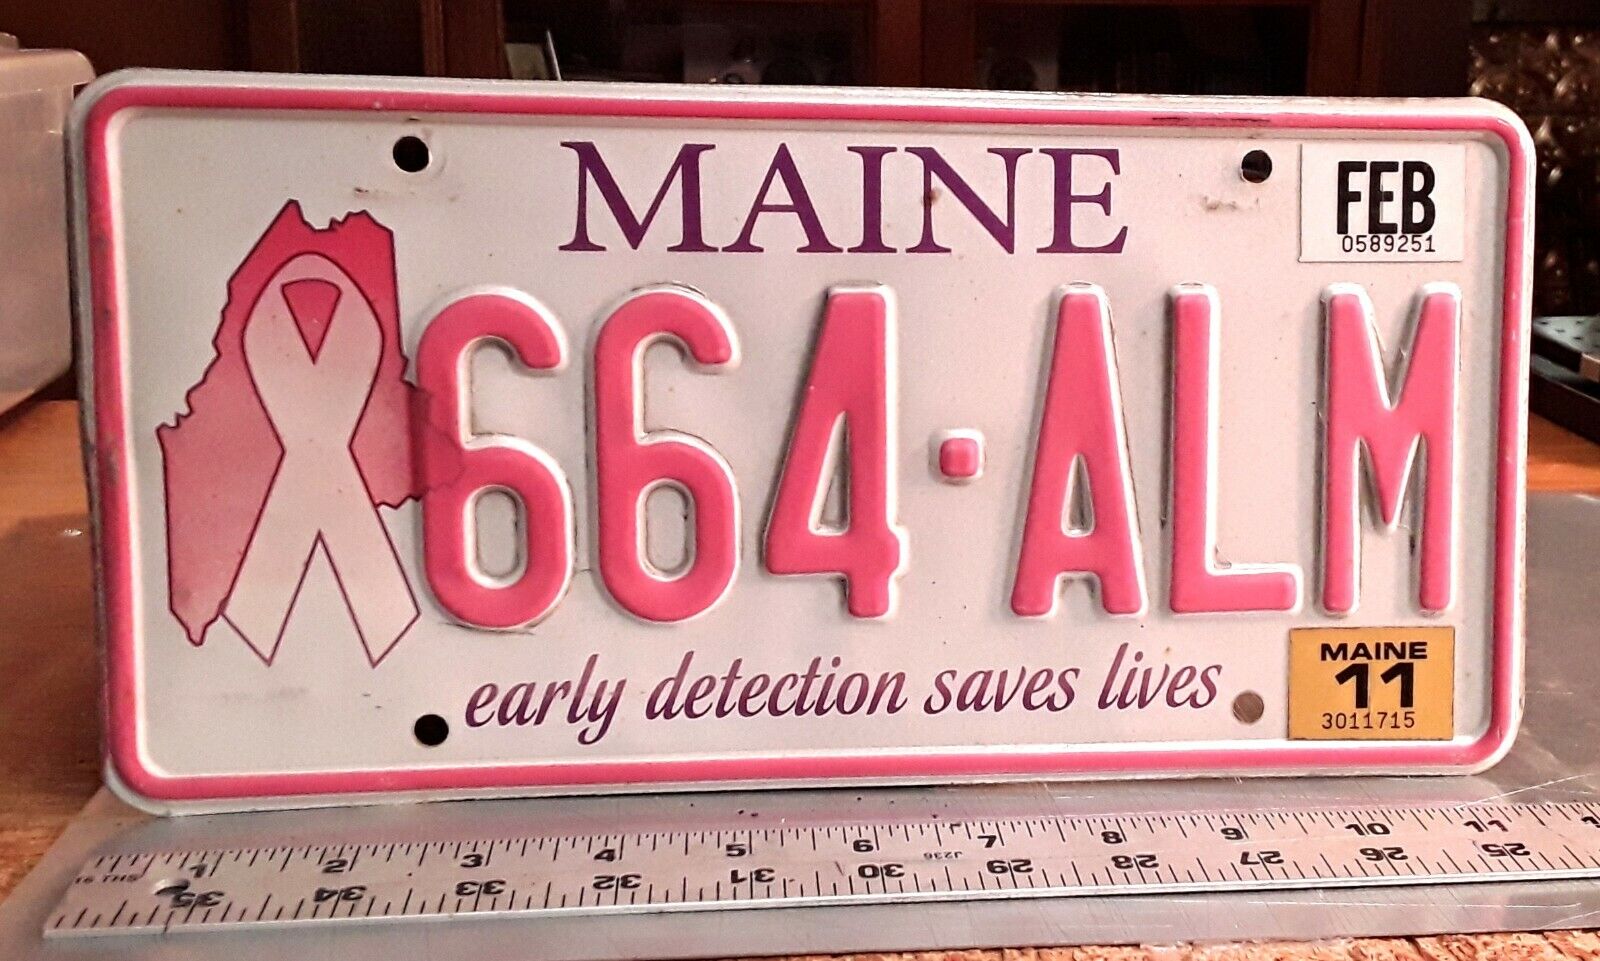 🇺🇸 - MAINE - 2011 Breast Cancer Awareness PINK license plate - nice used issue